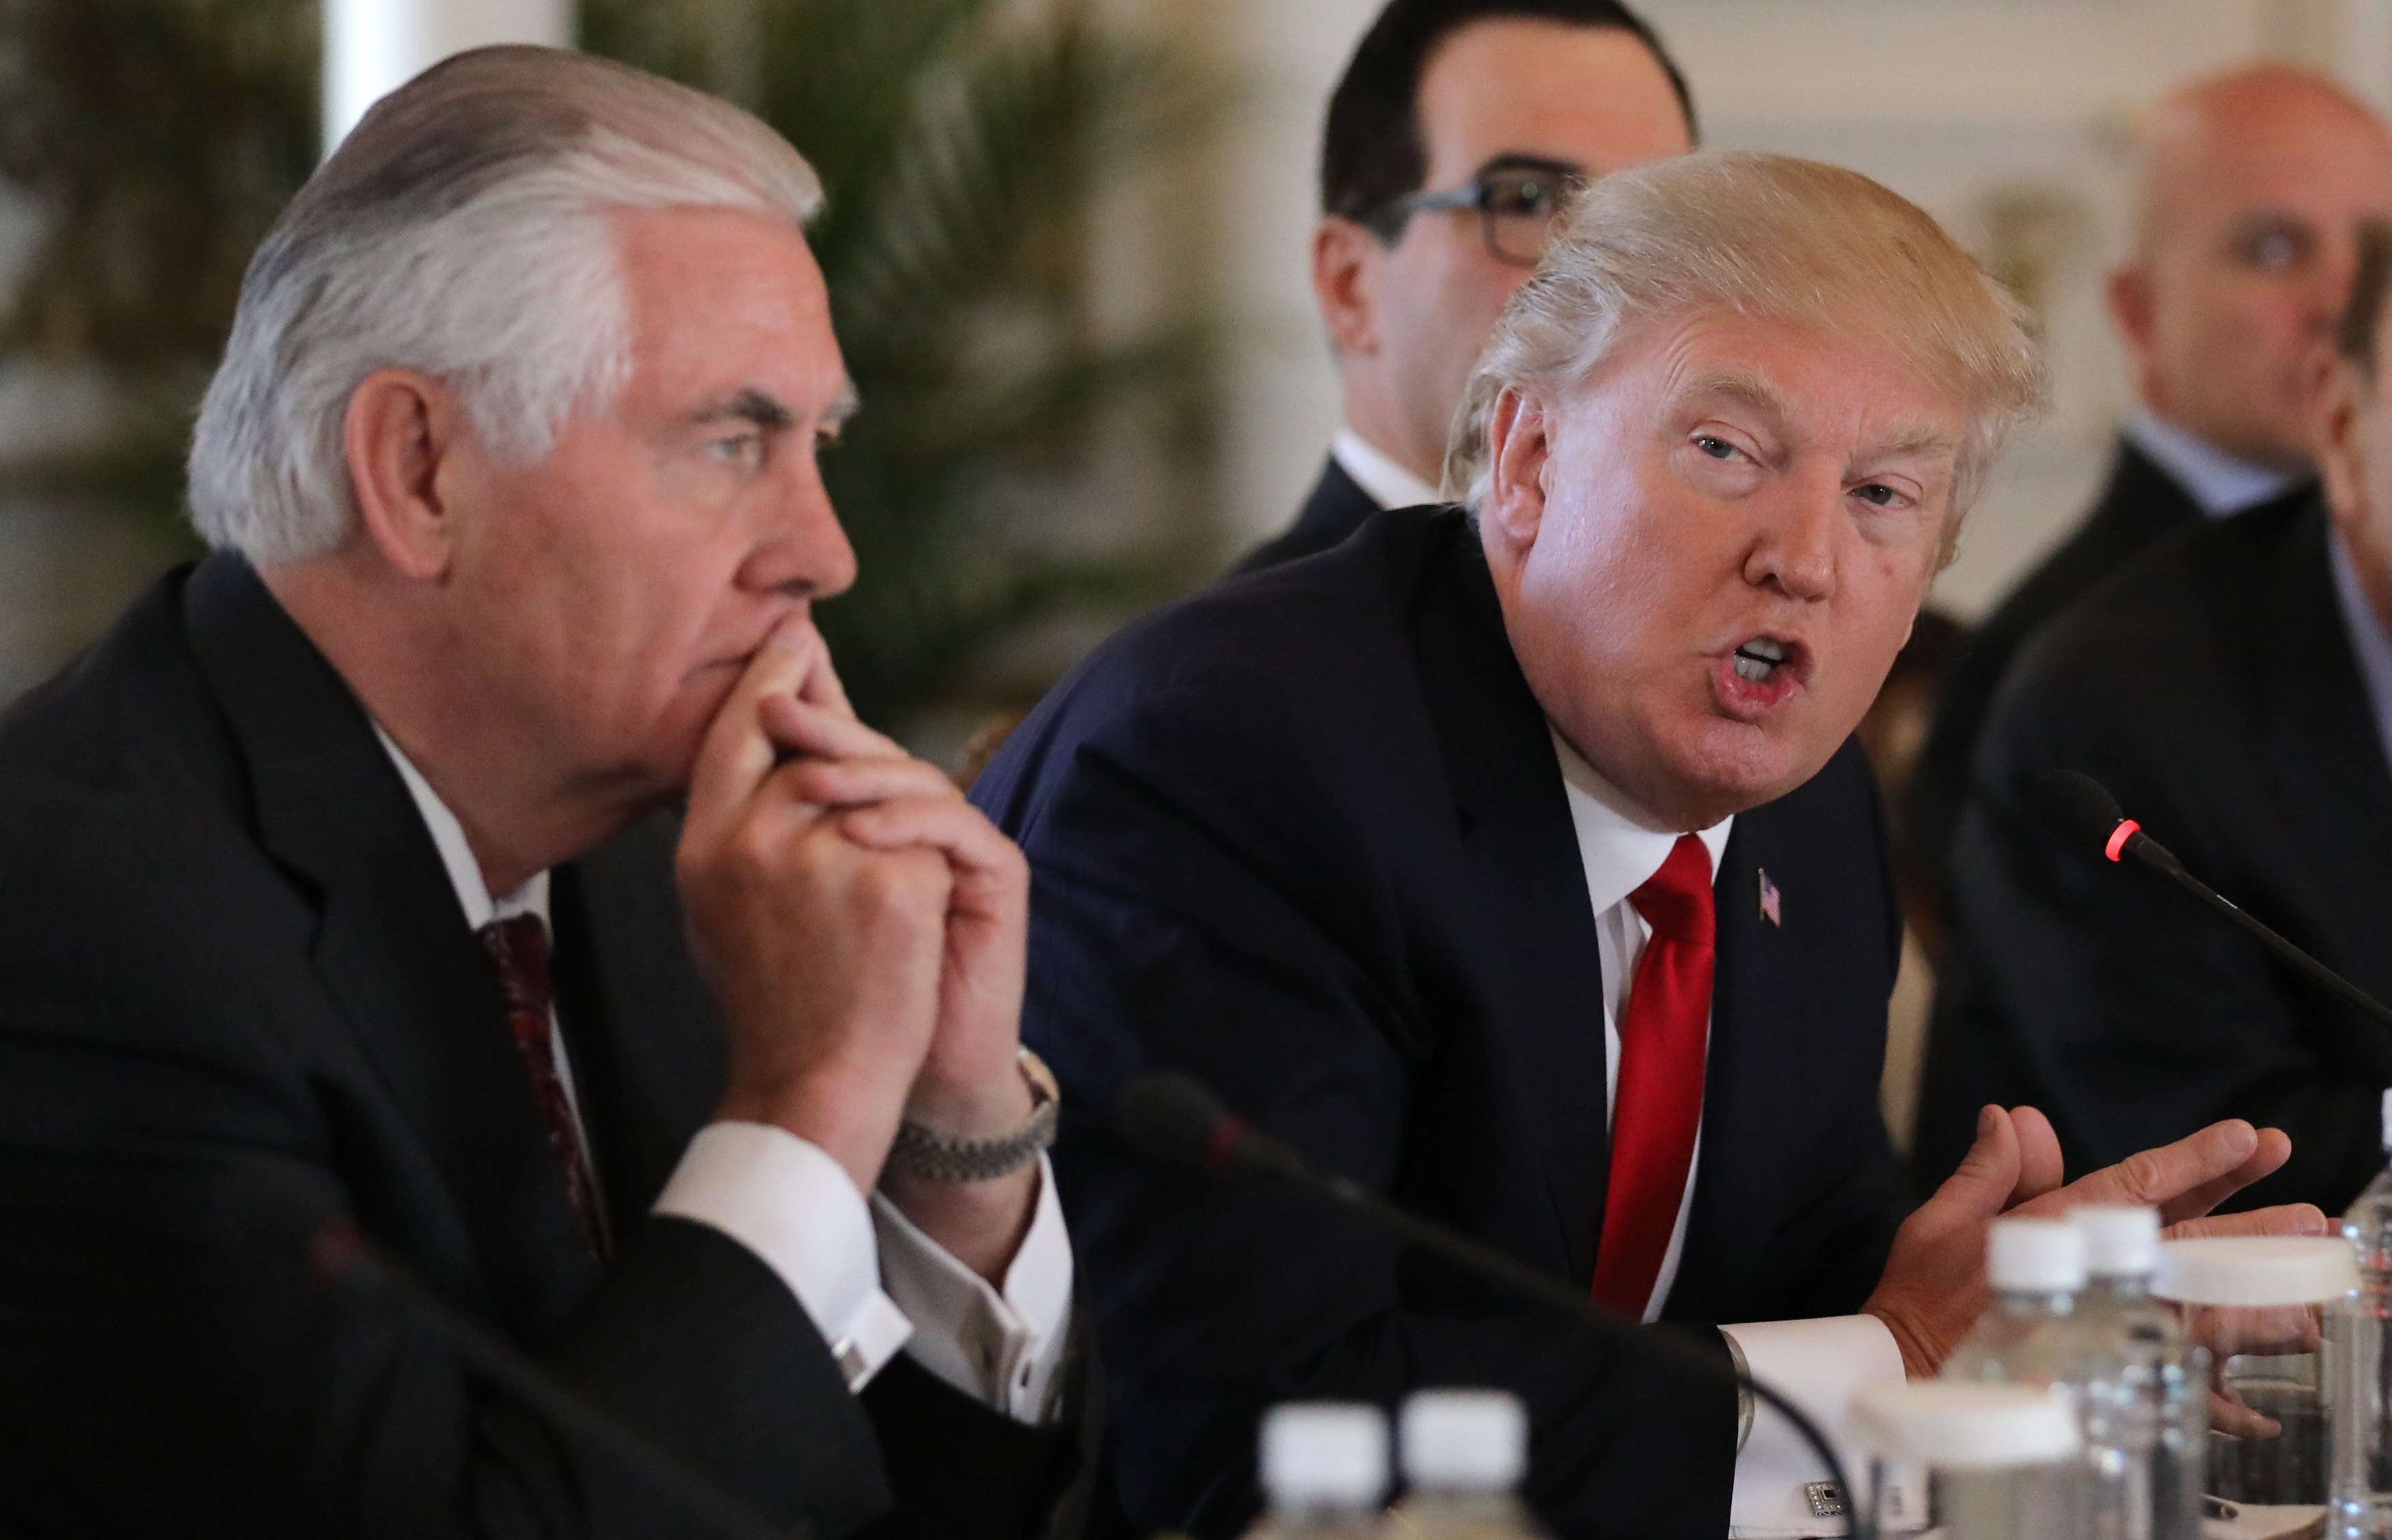 US President Donald Trump with Secretary of State Rex Tillerson during a bilateral meeting with China's President Xi Jinping at Trump's Mar-a-Lago estate. Photo: Reuters